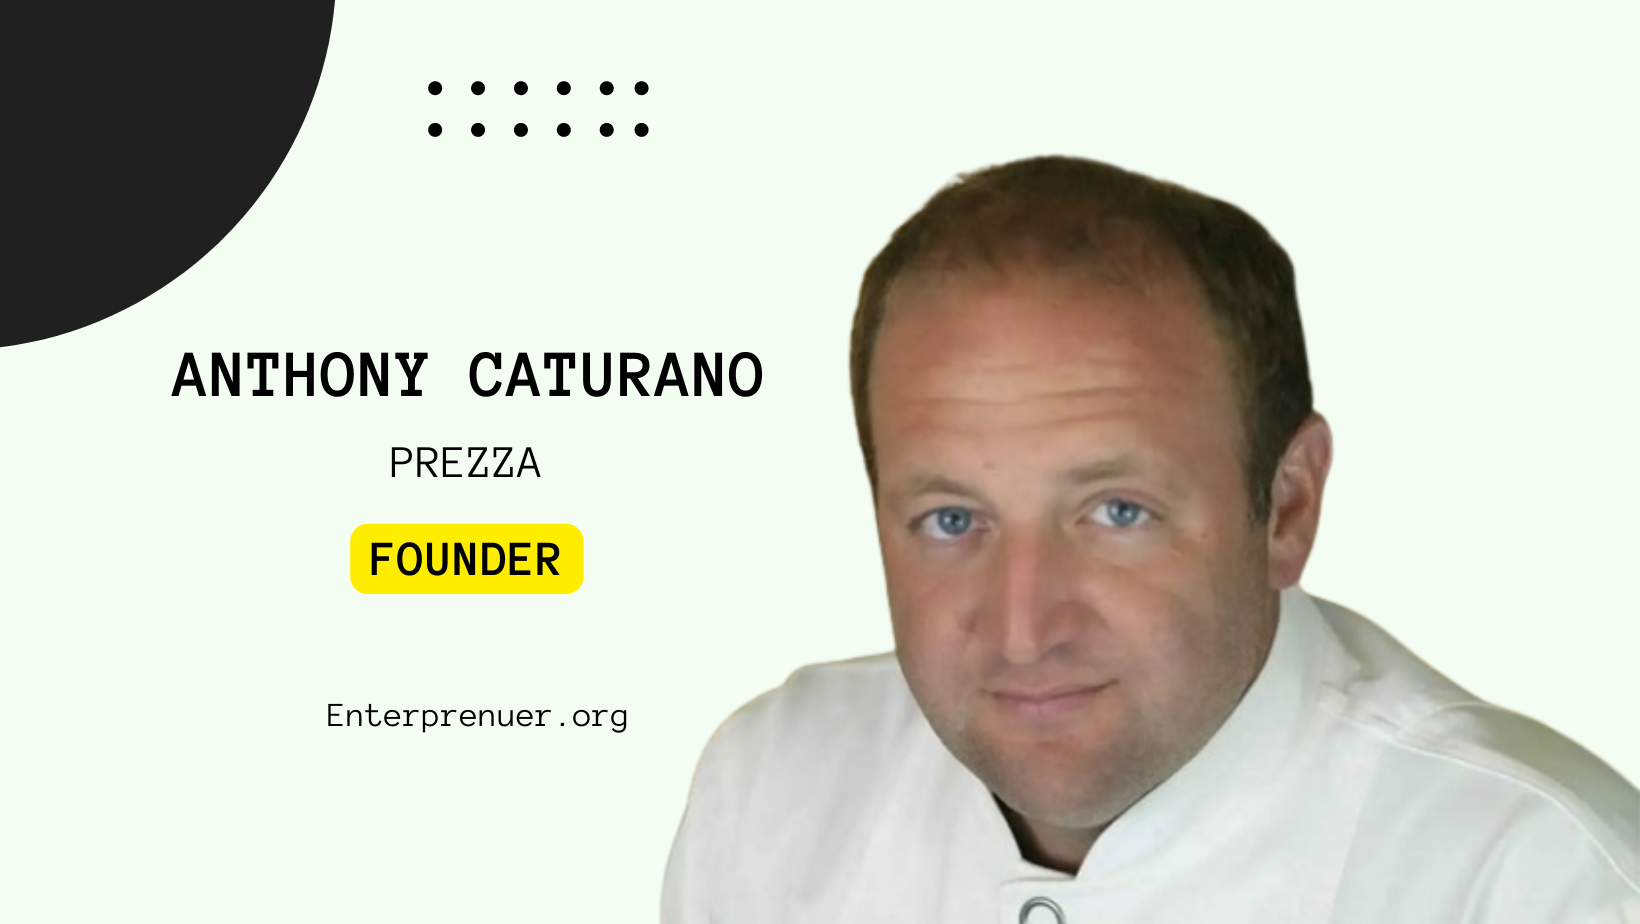 Meet Chef Anthony Caturano, Founder of Prezza